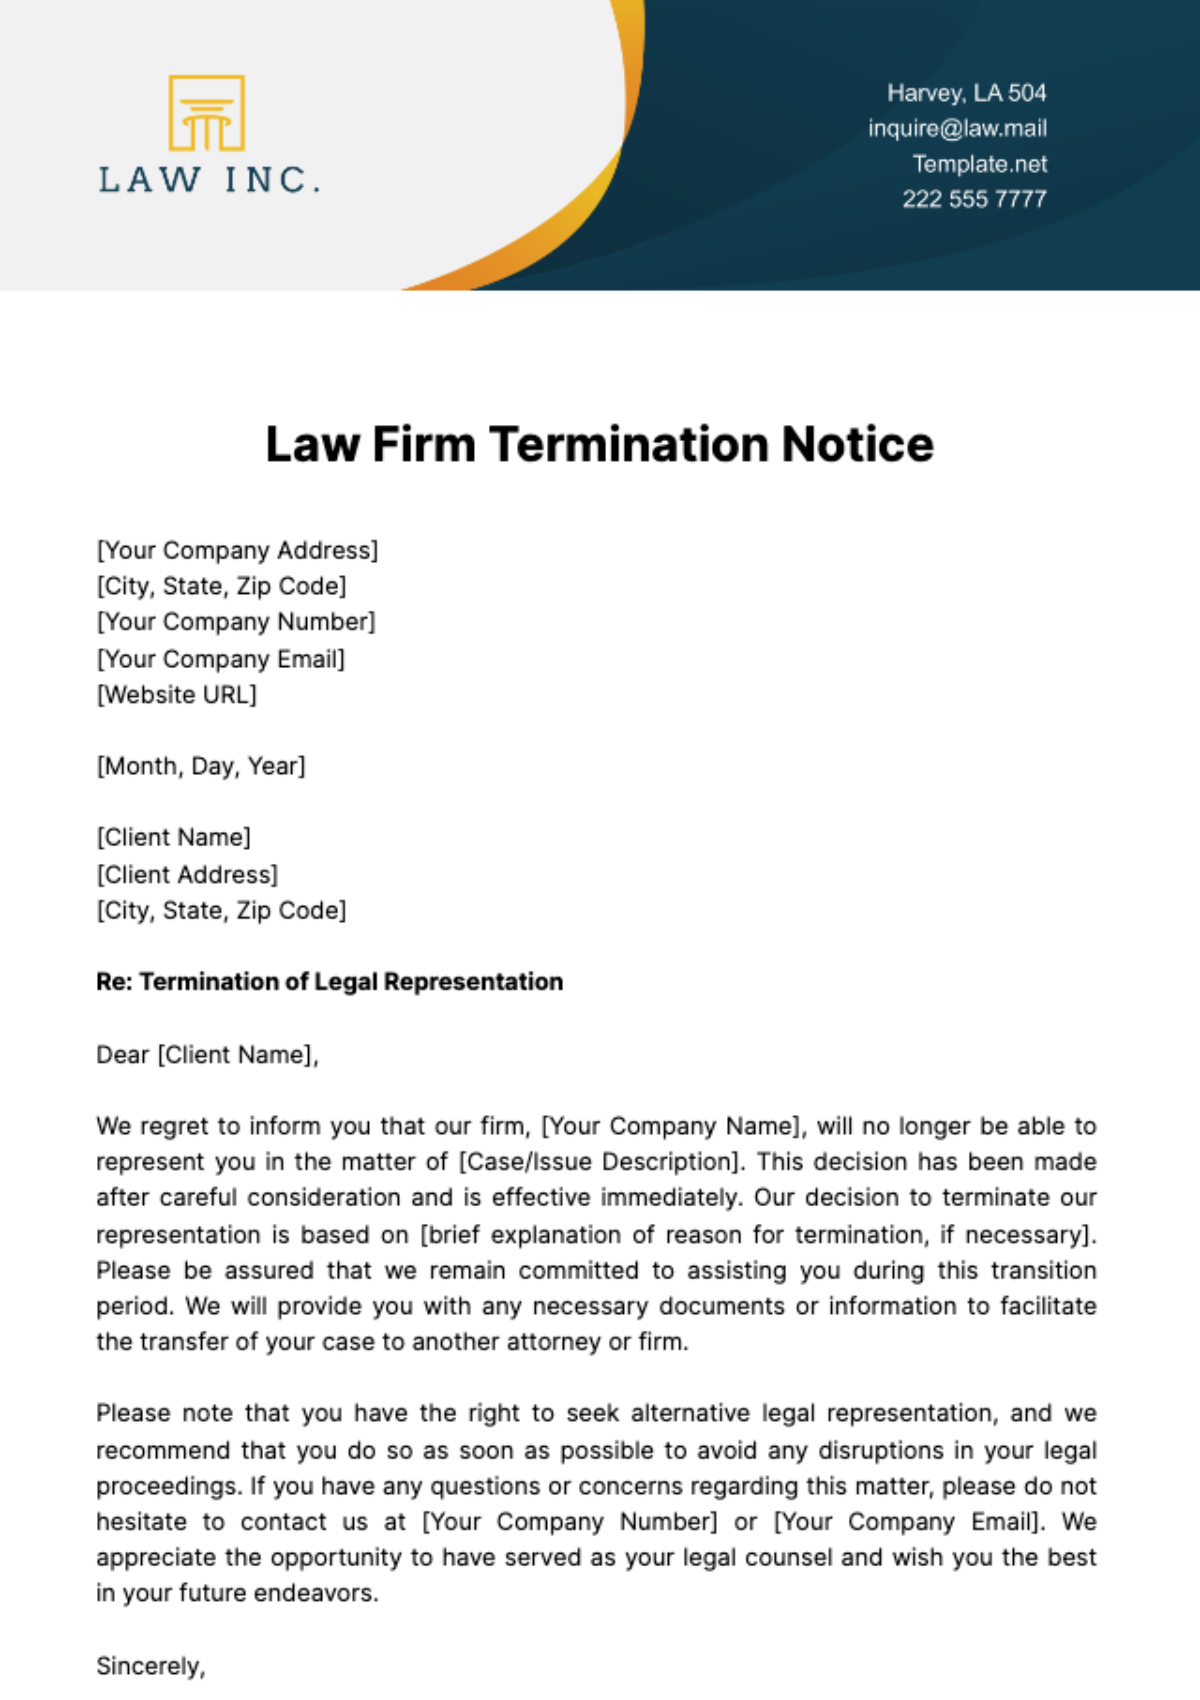 Law Firm Termination Notice Template